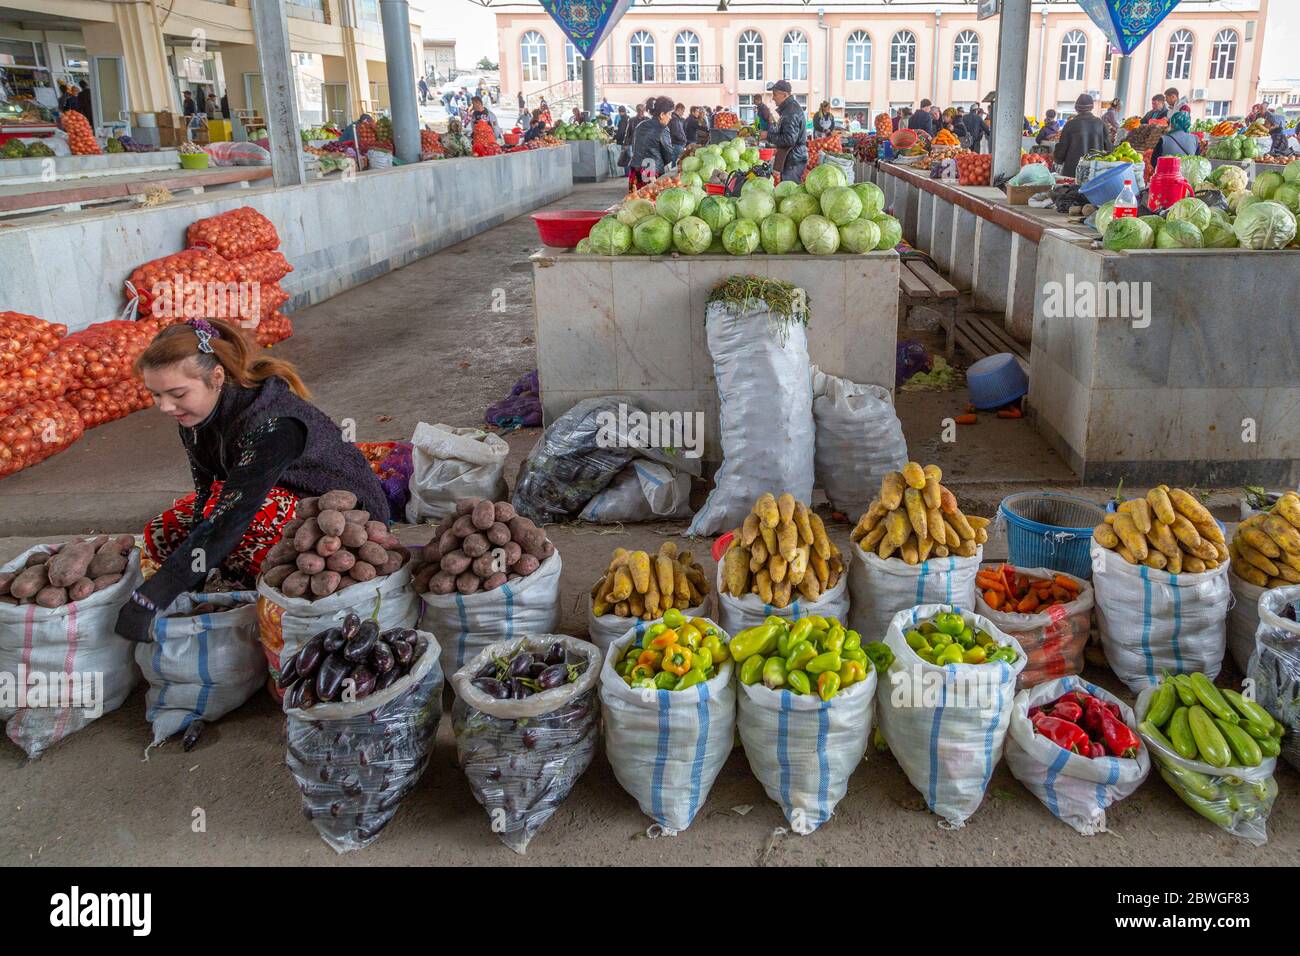 Fruits and vegetables market known as Siab Bazaar, in Samarkand, Uzbekistan Stock Photo